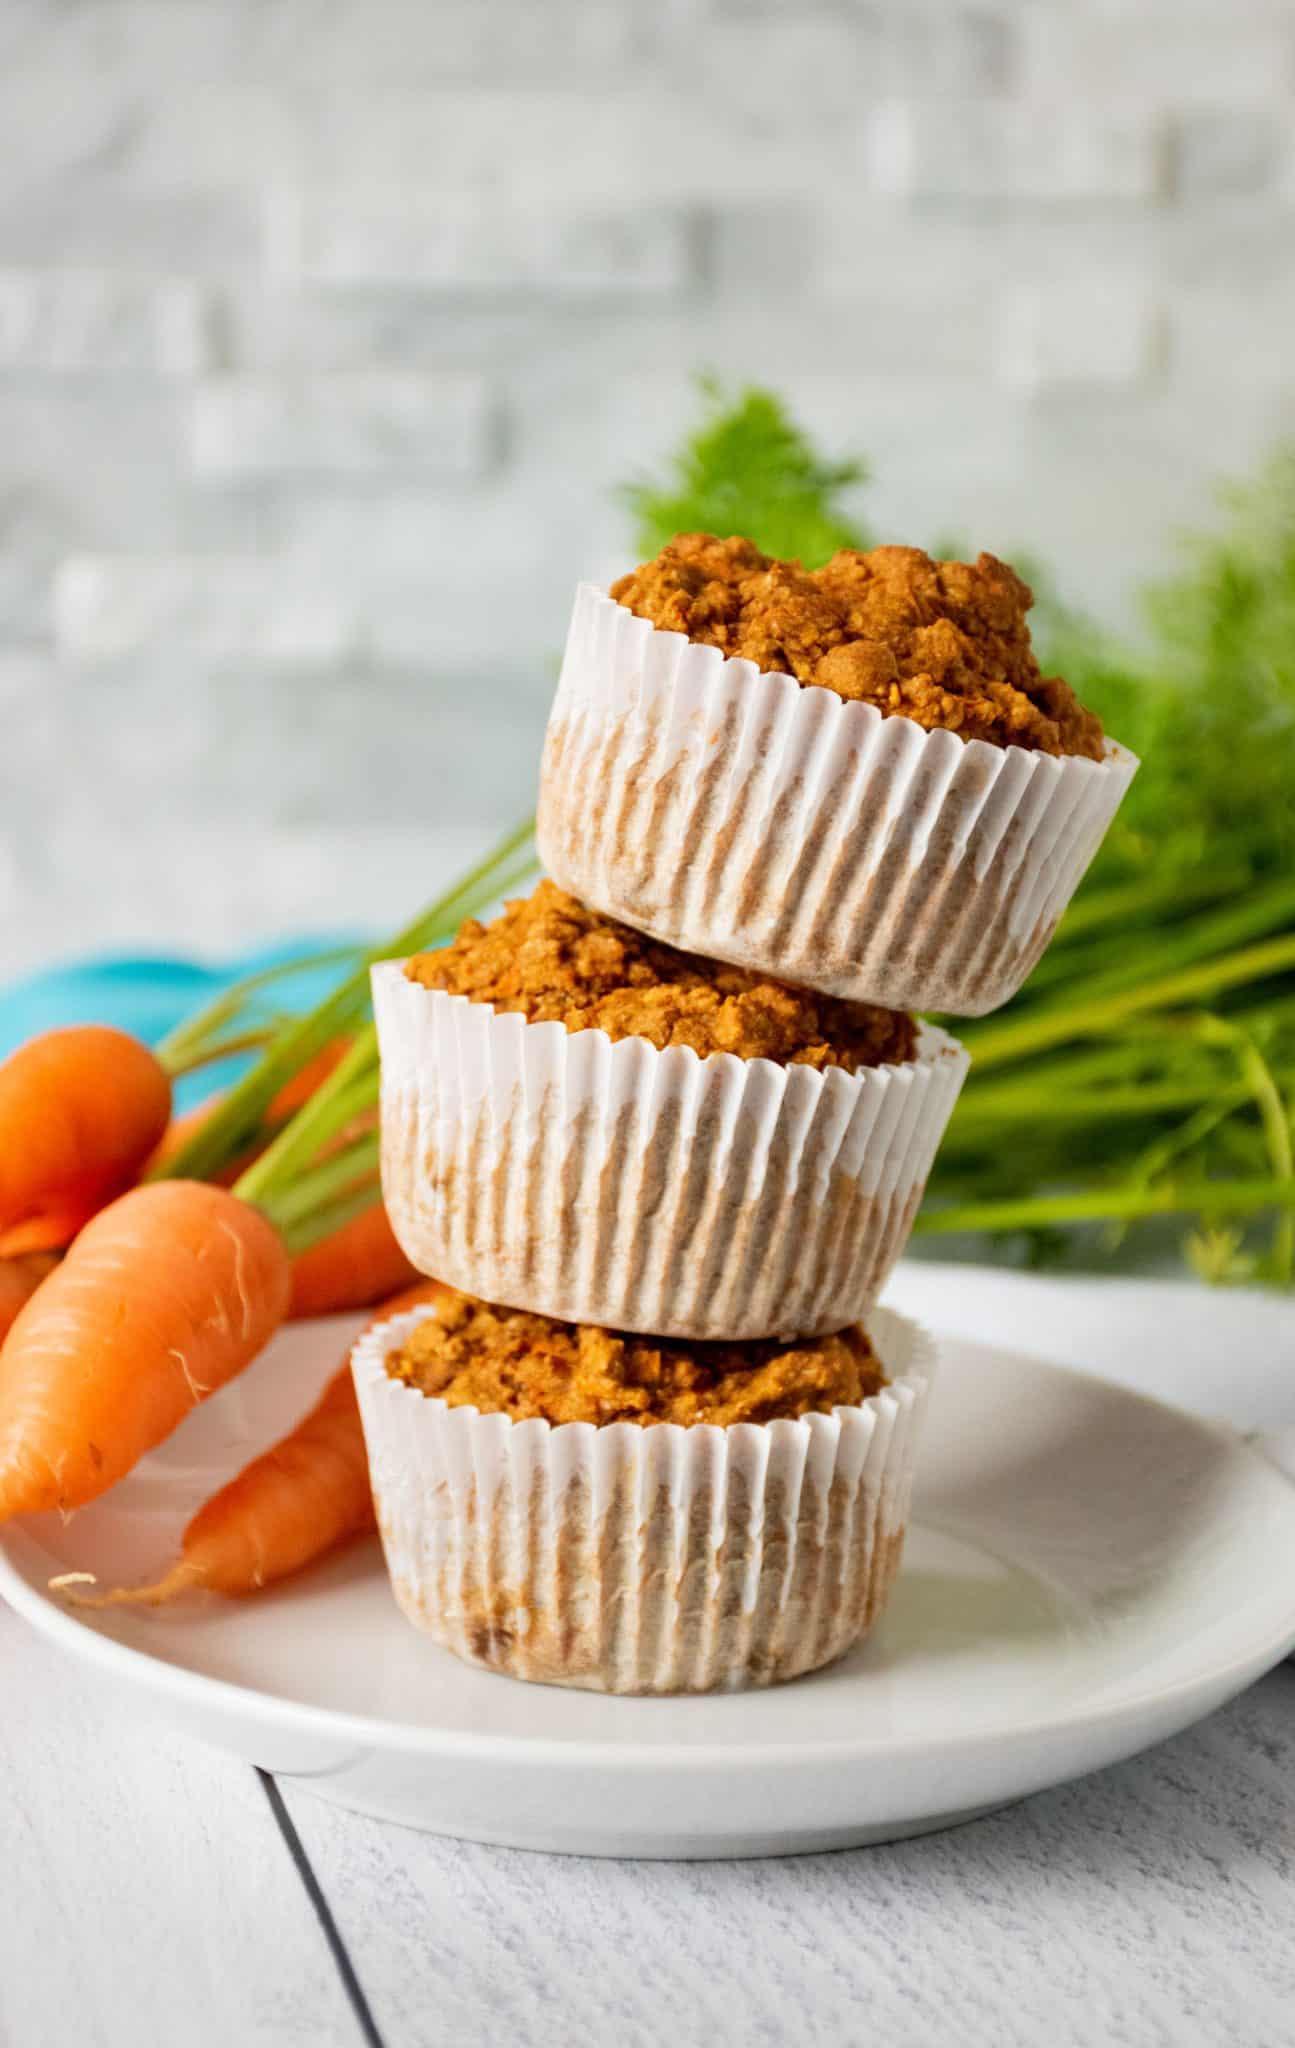 Stack of 3 muffins on a plate with fresh carrots in the background.